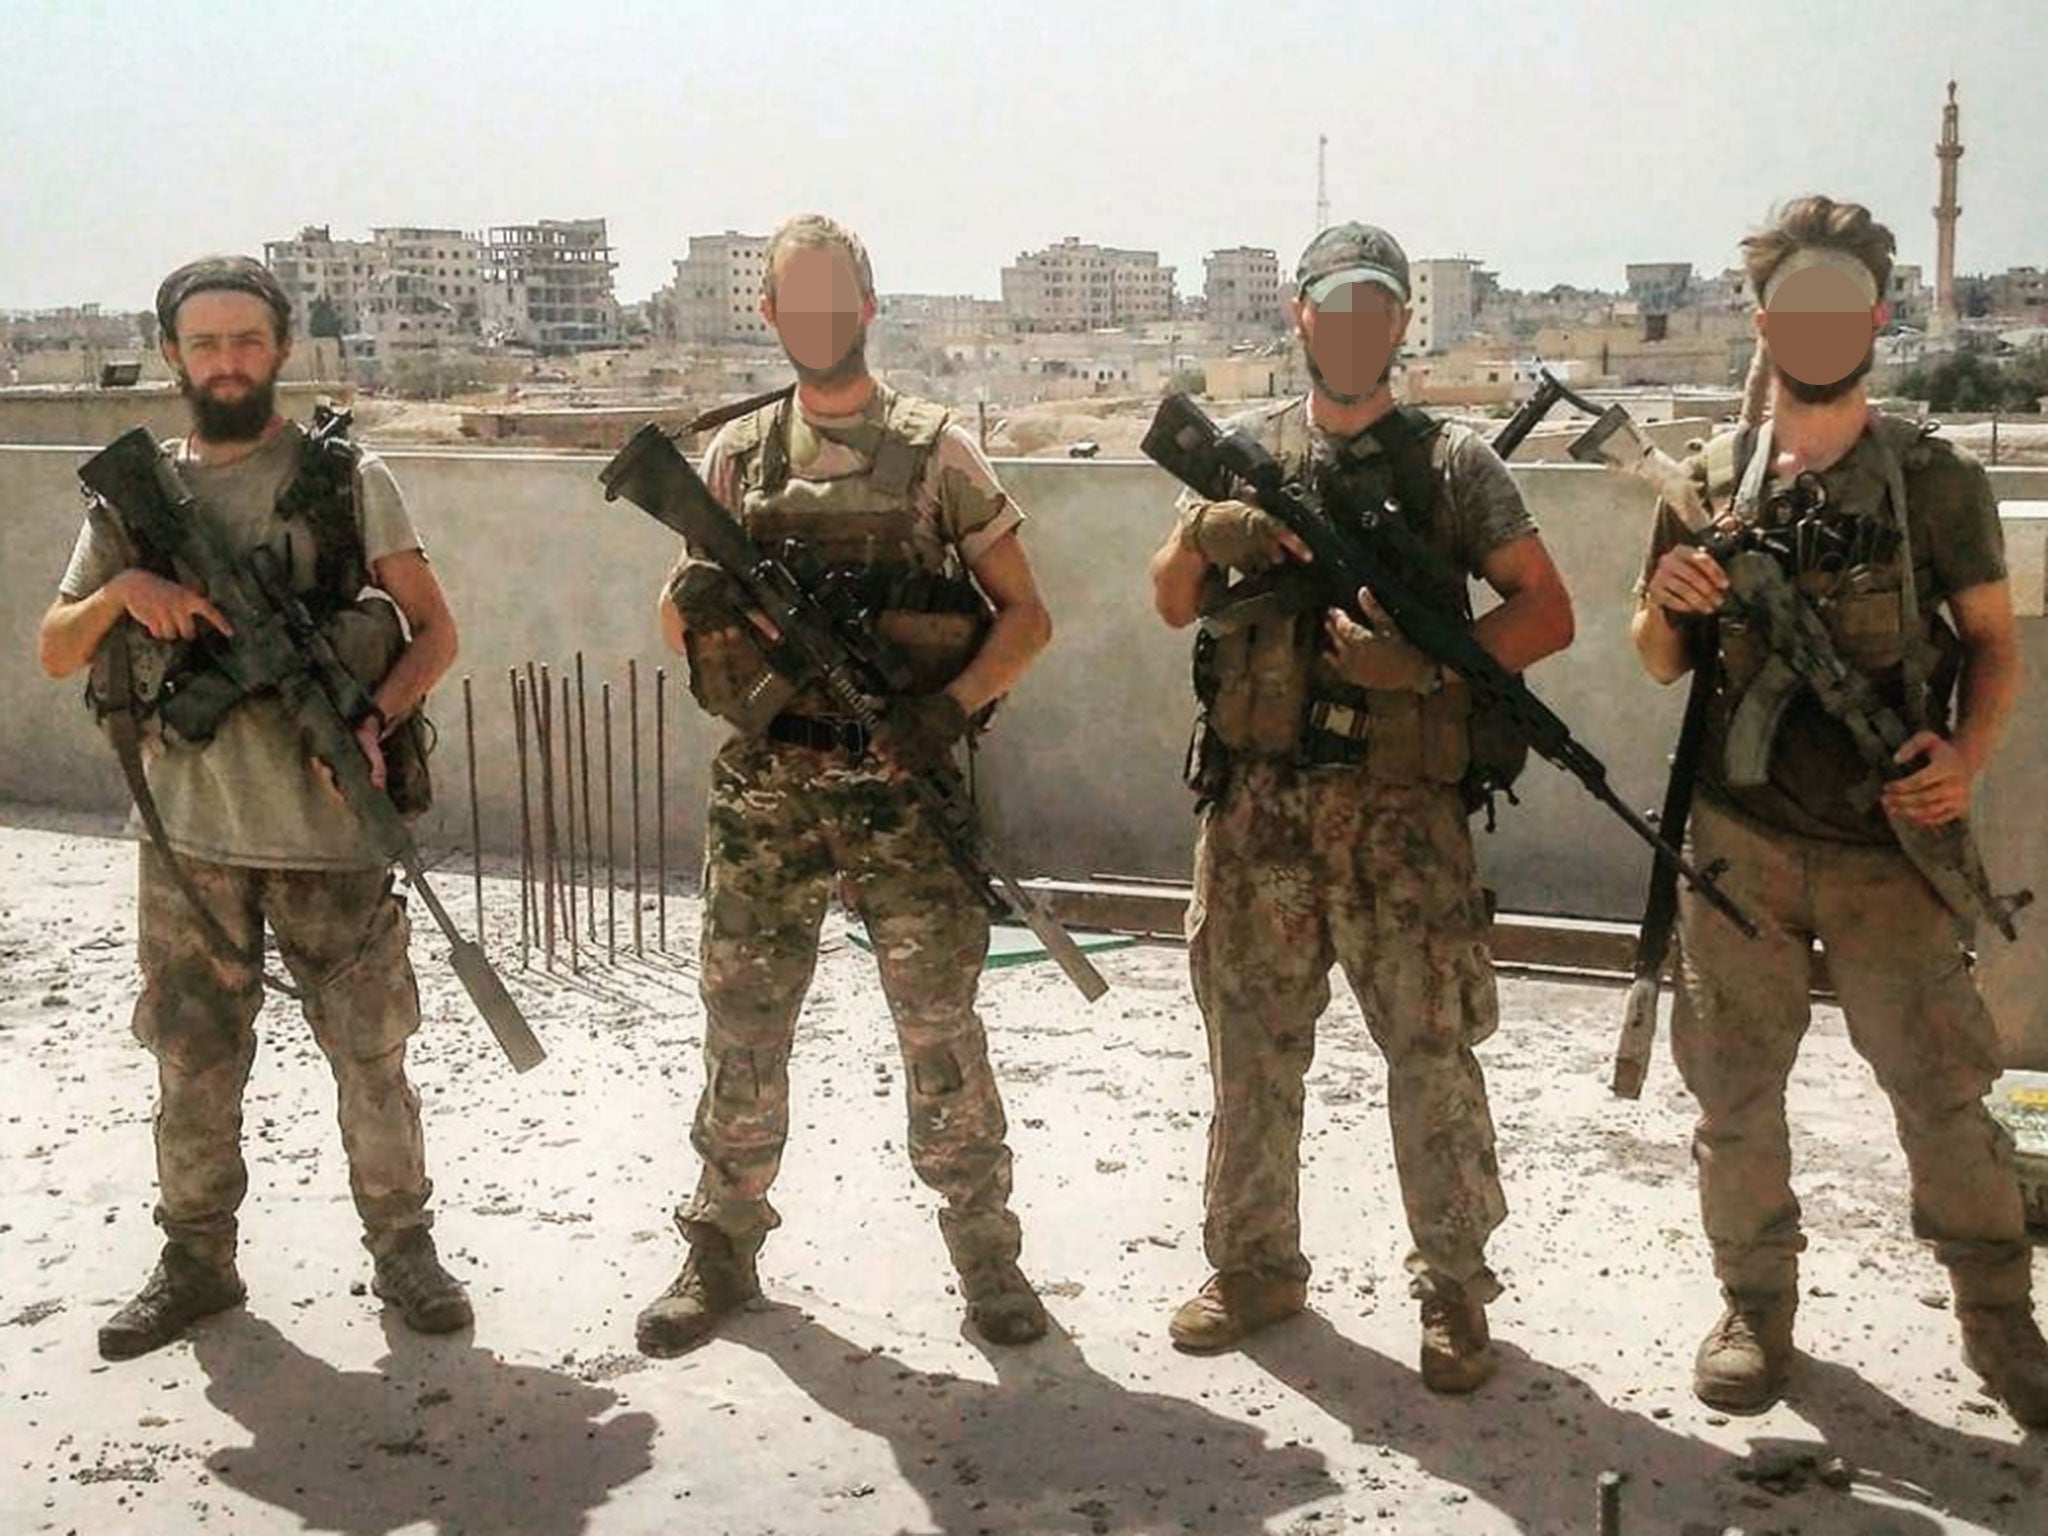 Jac Holmes (far left), a 24-year-old YPG volunteer from Bournemouth, was part of an anti-Isis sniper team in Raqqa